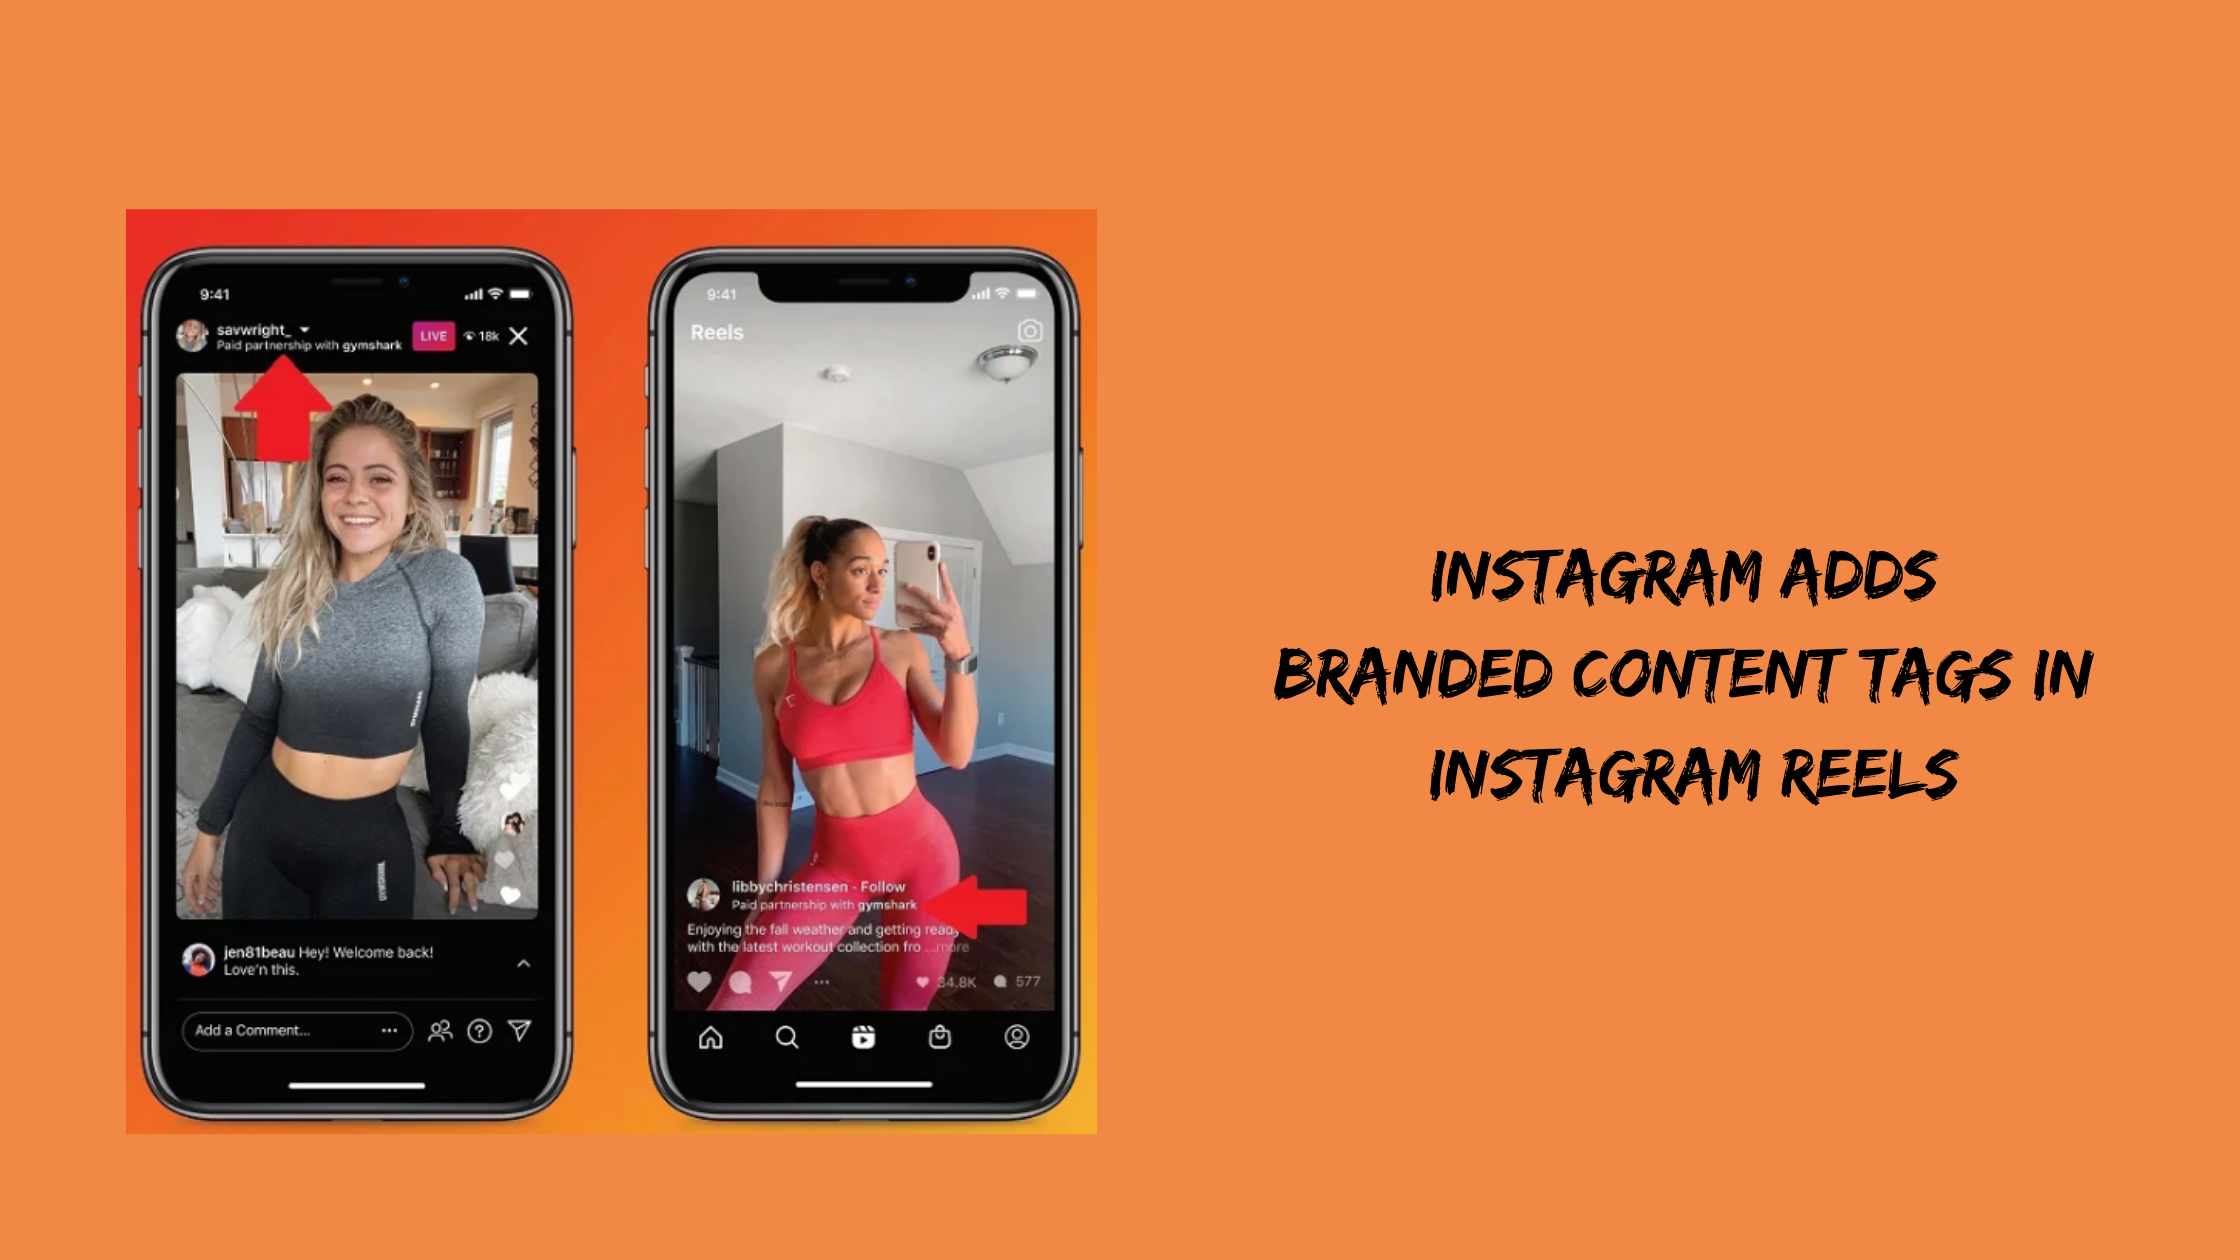 Instagram adds a New Branded Content option, including branded content tags in Reels.